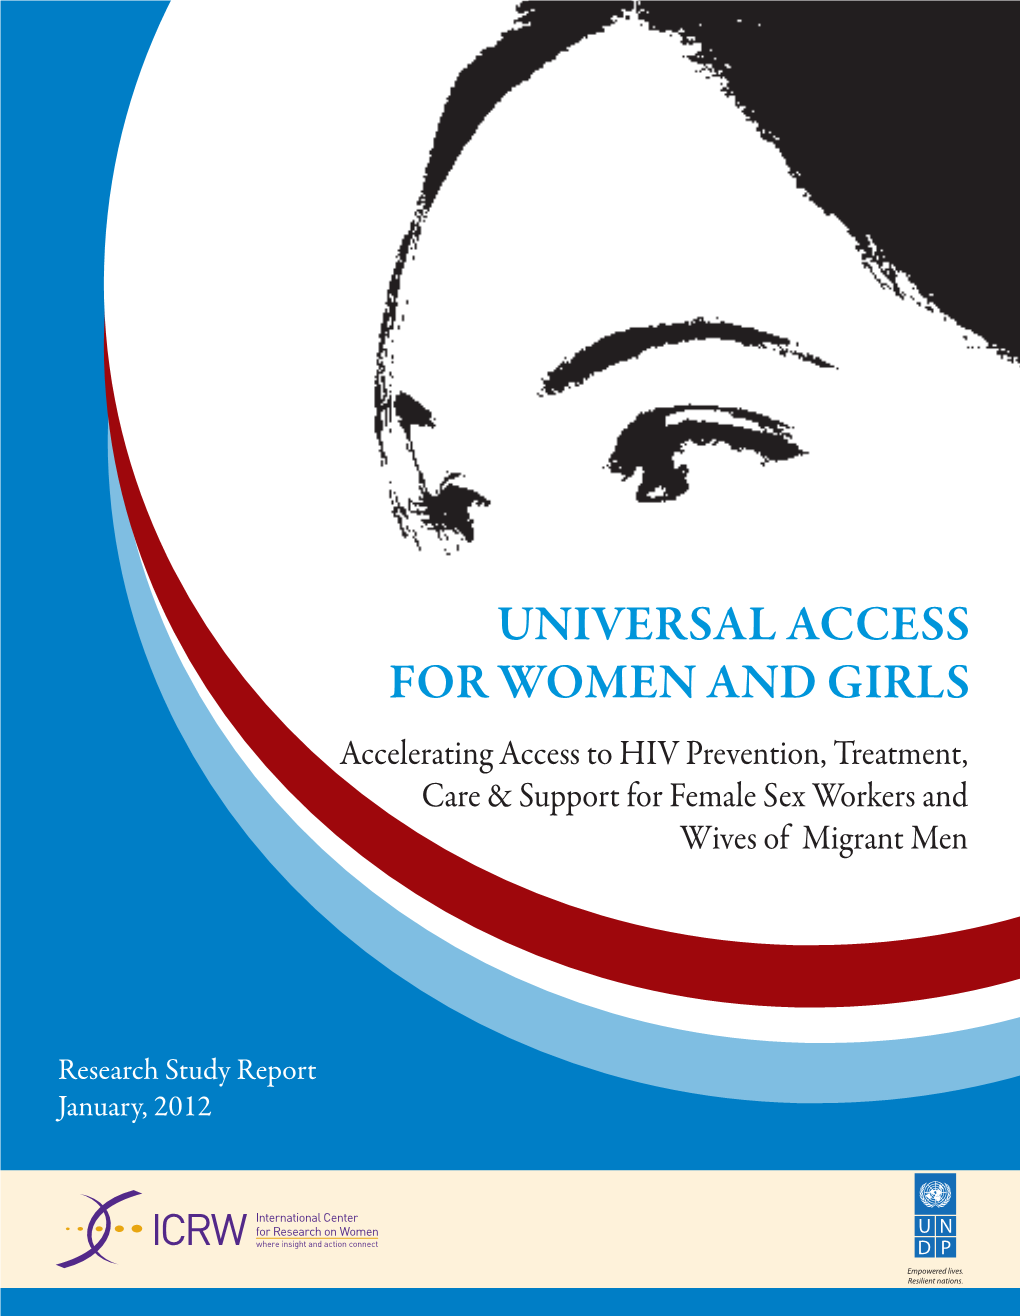 UNIVERSAL ACCESS for WOMEN and GIRLS Accelerating Access to HIV Prevention, Treatment, Care & Support for Female Sex Workers and Wives of Migrant Men